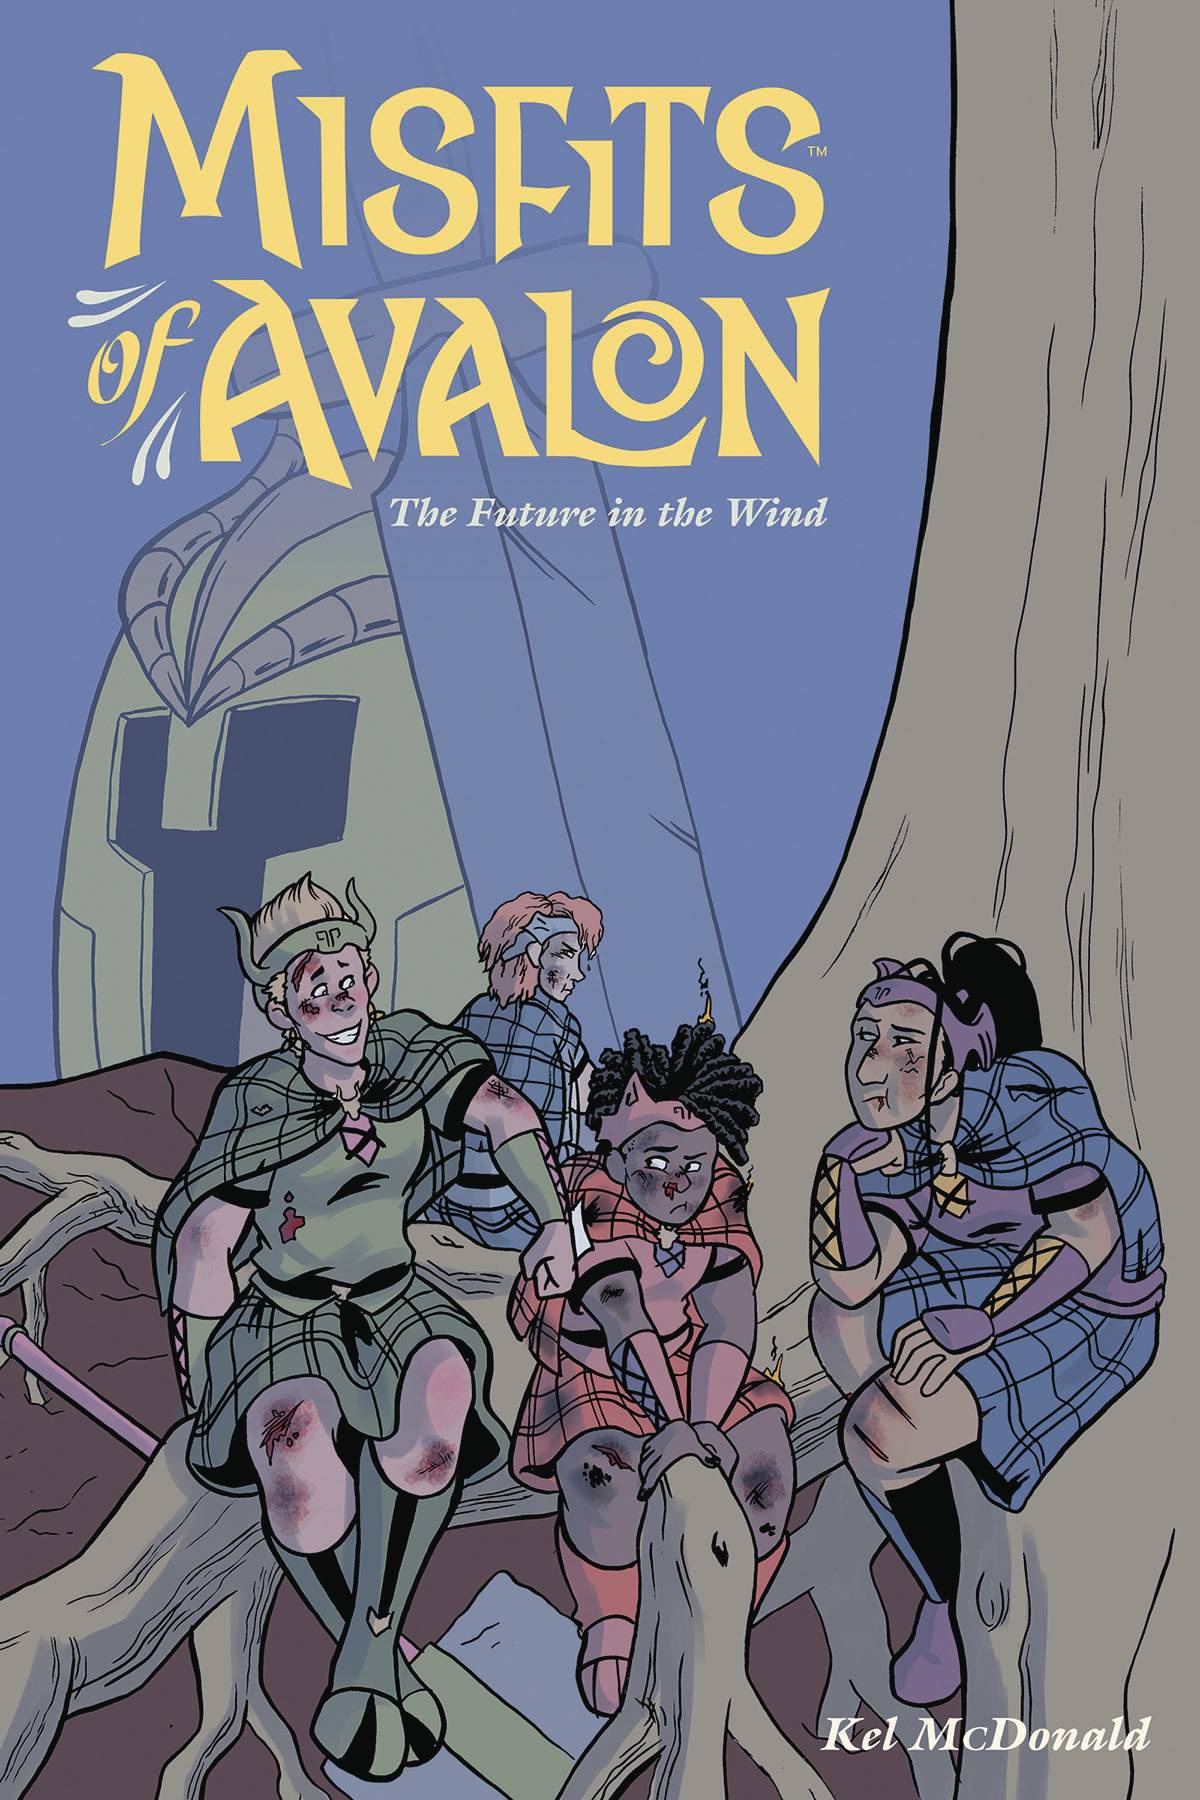 MISFITS OF AVALON TP VOL 03 FUTURE IN WIND (MAY170047)